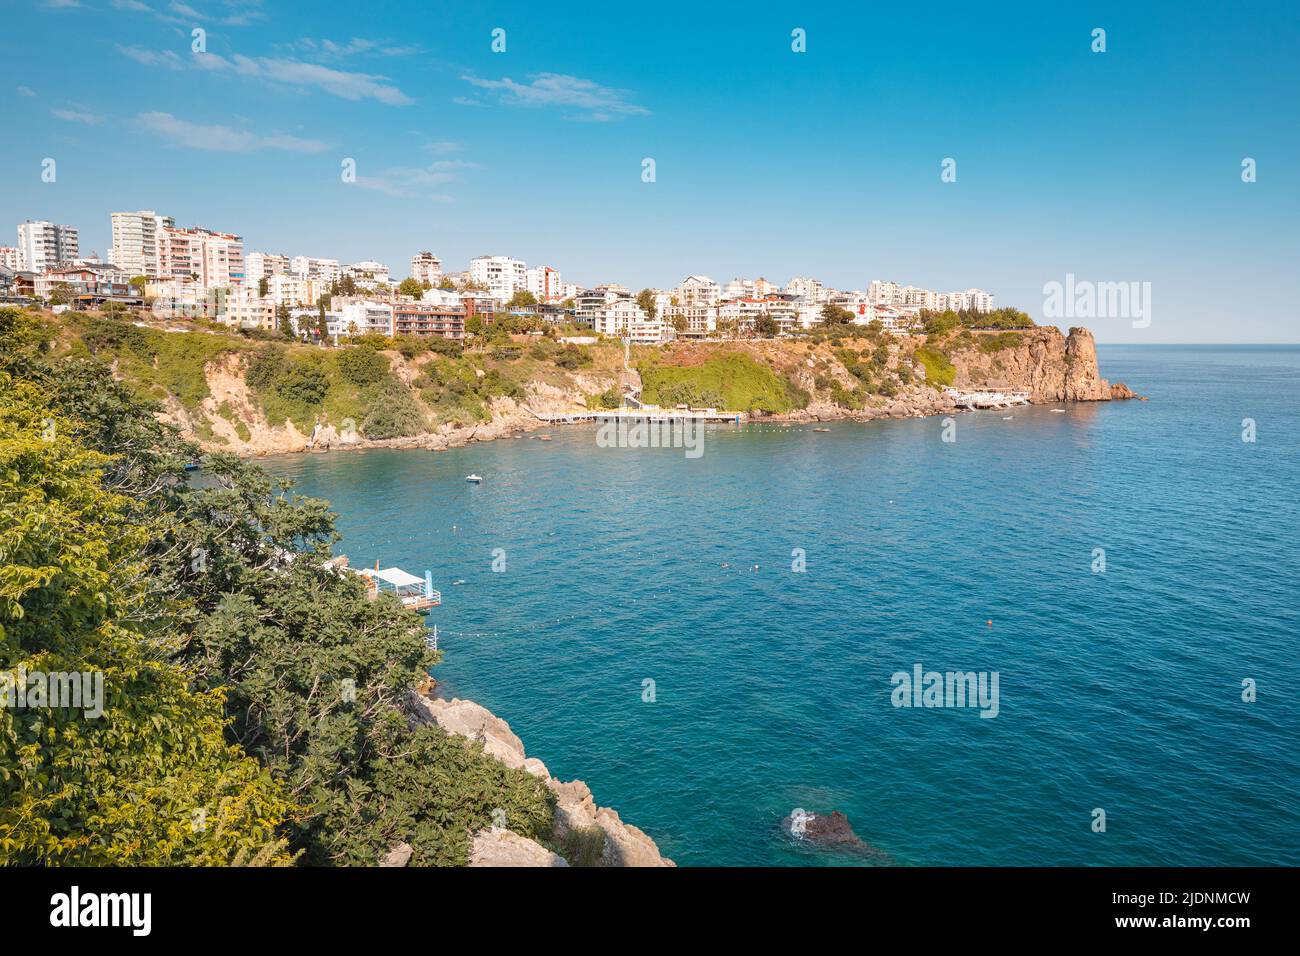 Lara district of a resort town of Antalya, Turkey situated on a high cliff. Vacation and coastline concept Stock Photo